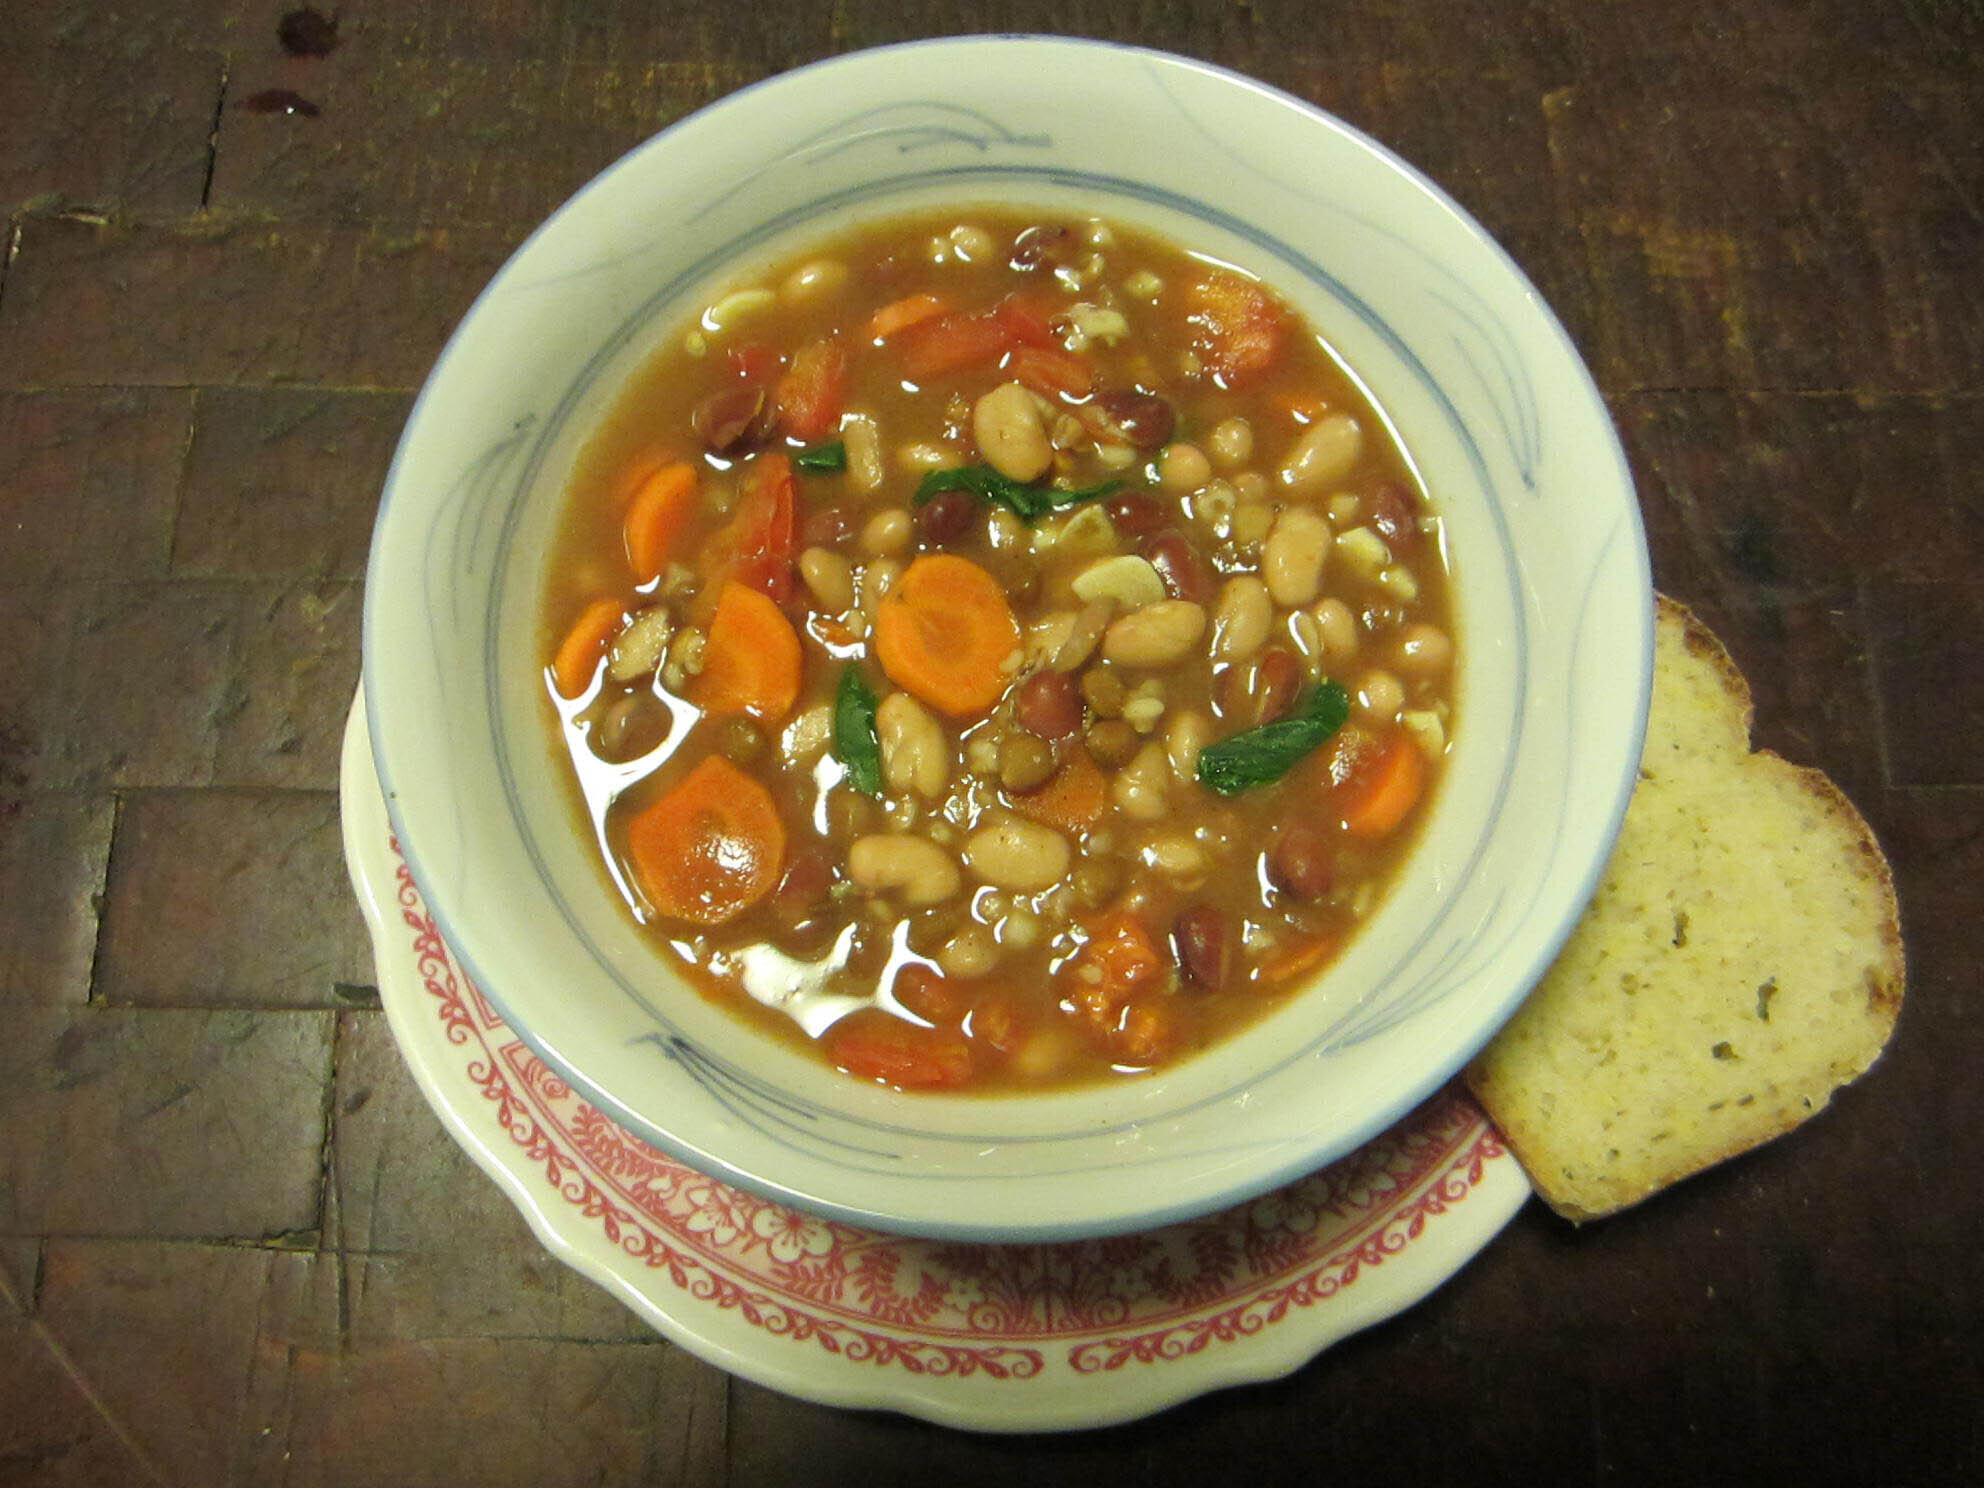 Bowl of vegetable bean soup with a slice of bread on the side